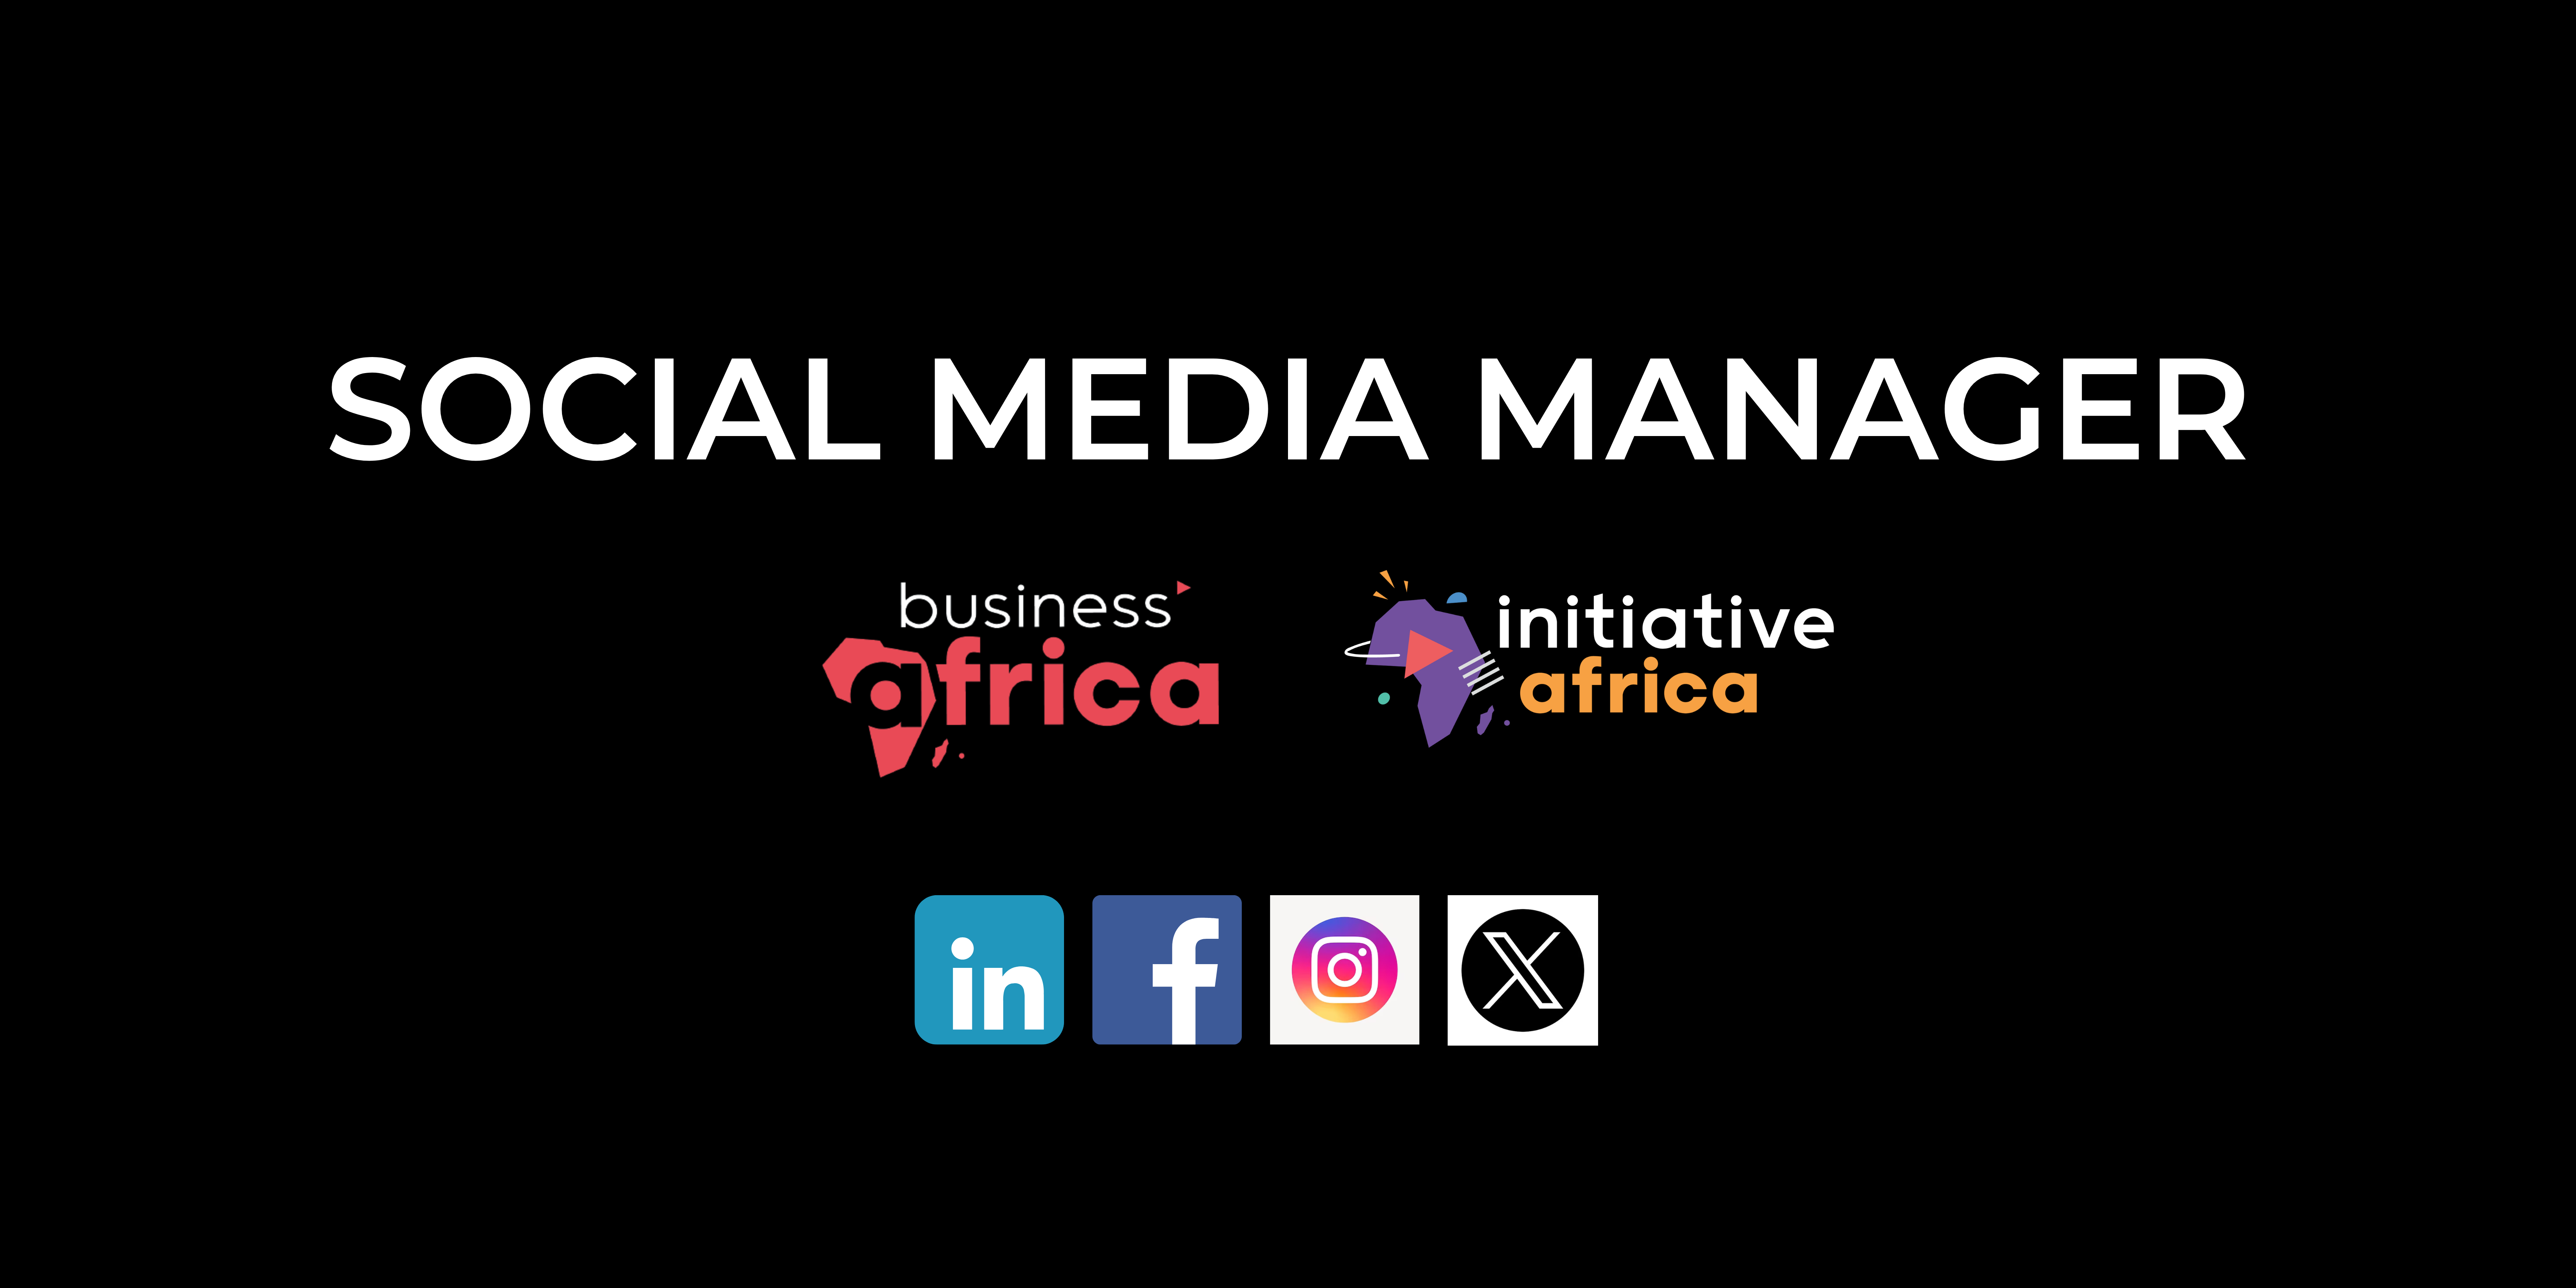 Social Media Manager – Business Africa & Initiative Africa